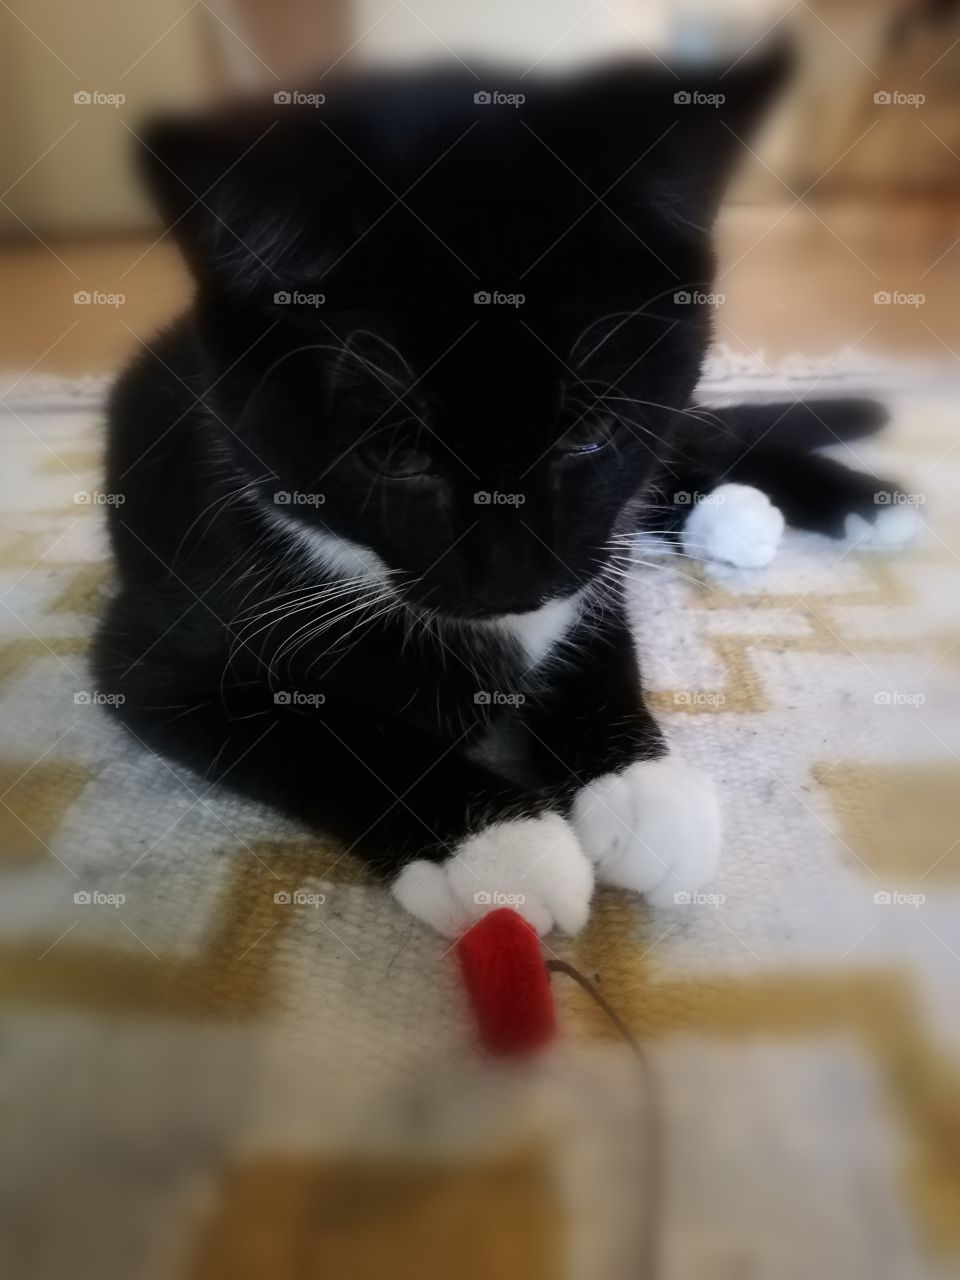 A small cute kitten resting on the white and beige patterned woolen carpet. A red toy with a string in the front of paws of the black and white cat.